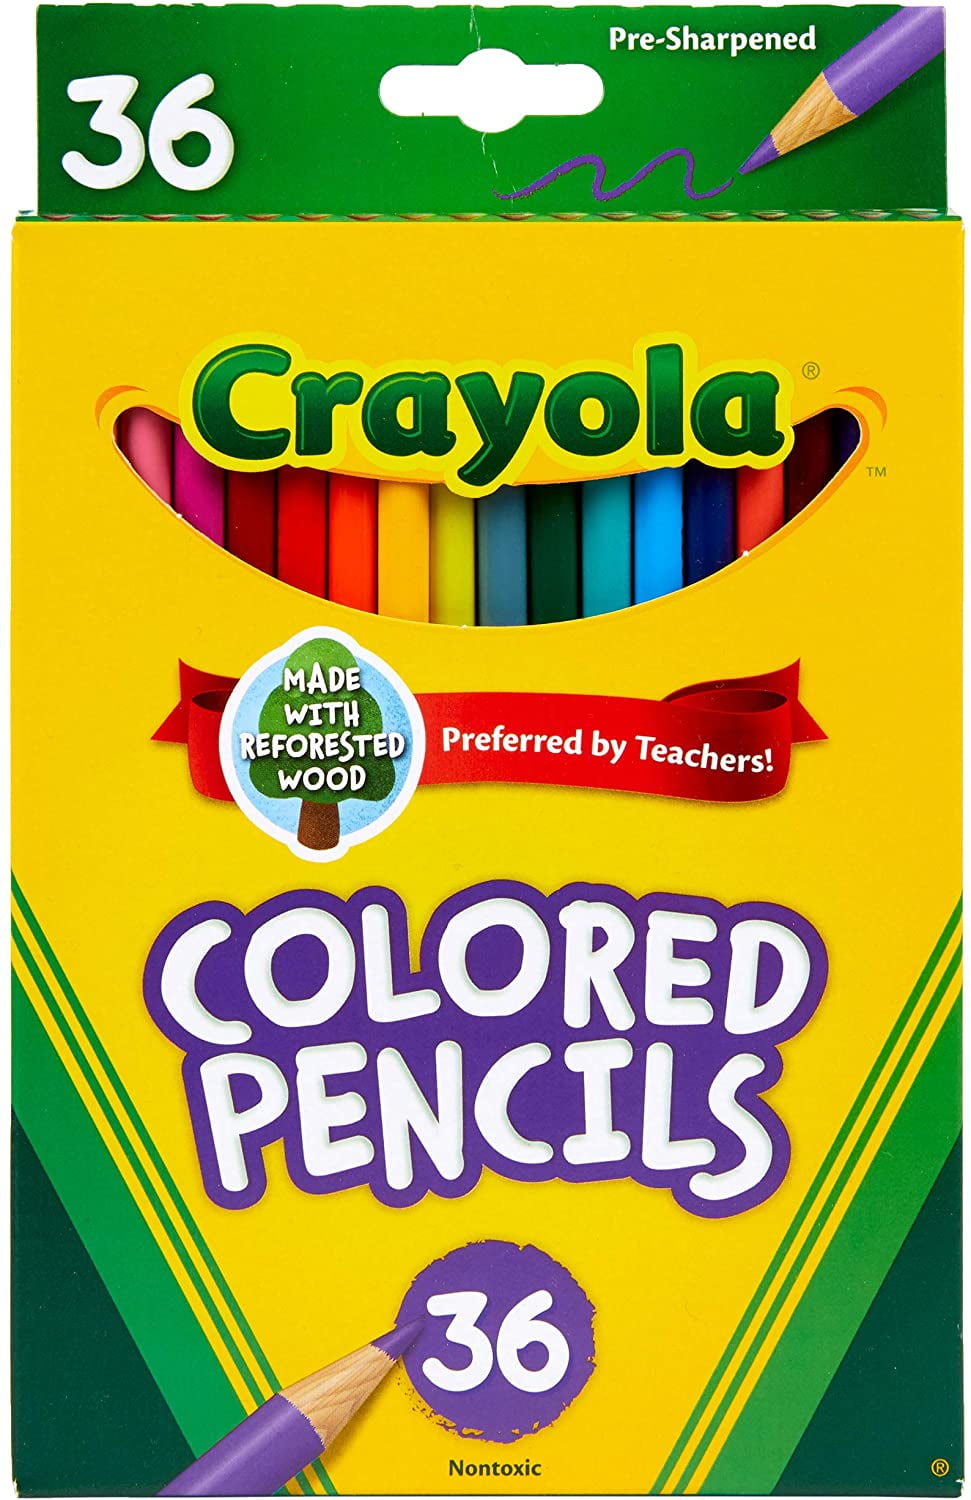 Crayola Erasable Colored Pencils, 36 Count, Art Tools, Stocking Stuffers,  Gifts, Ages 4, 5, 6, 7